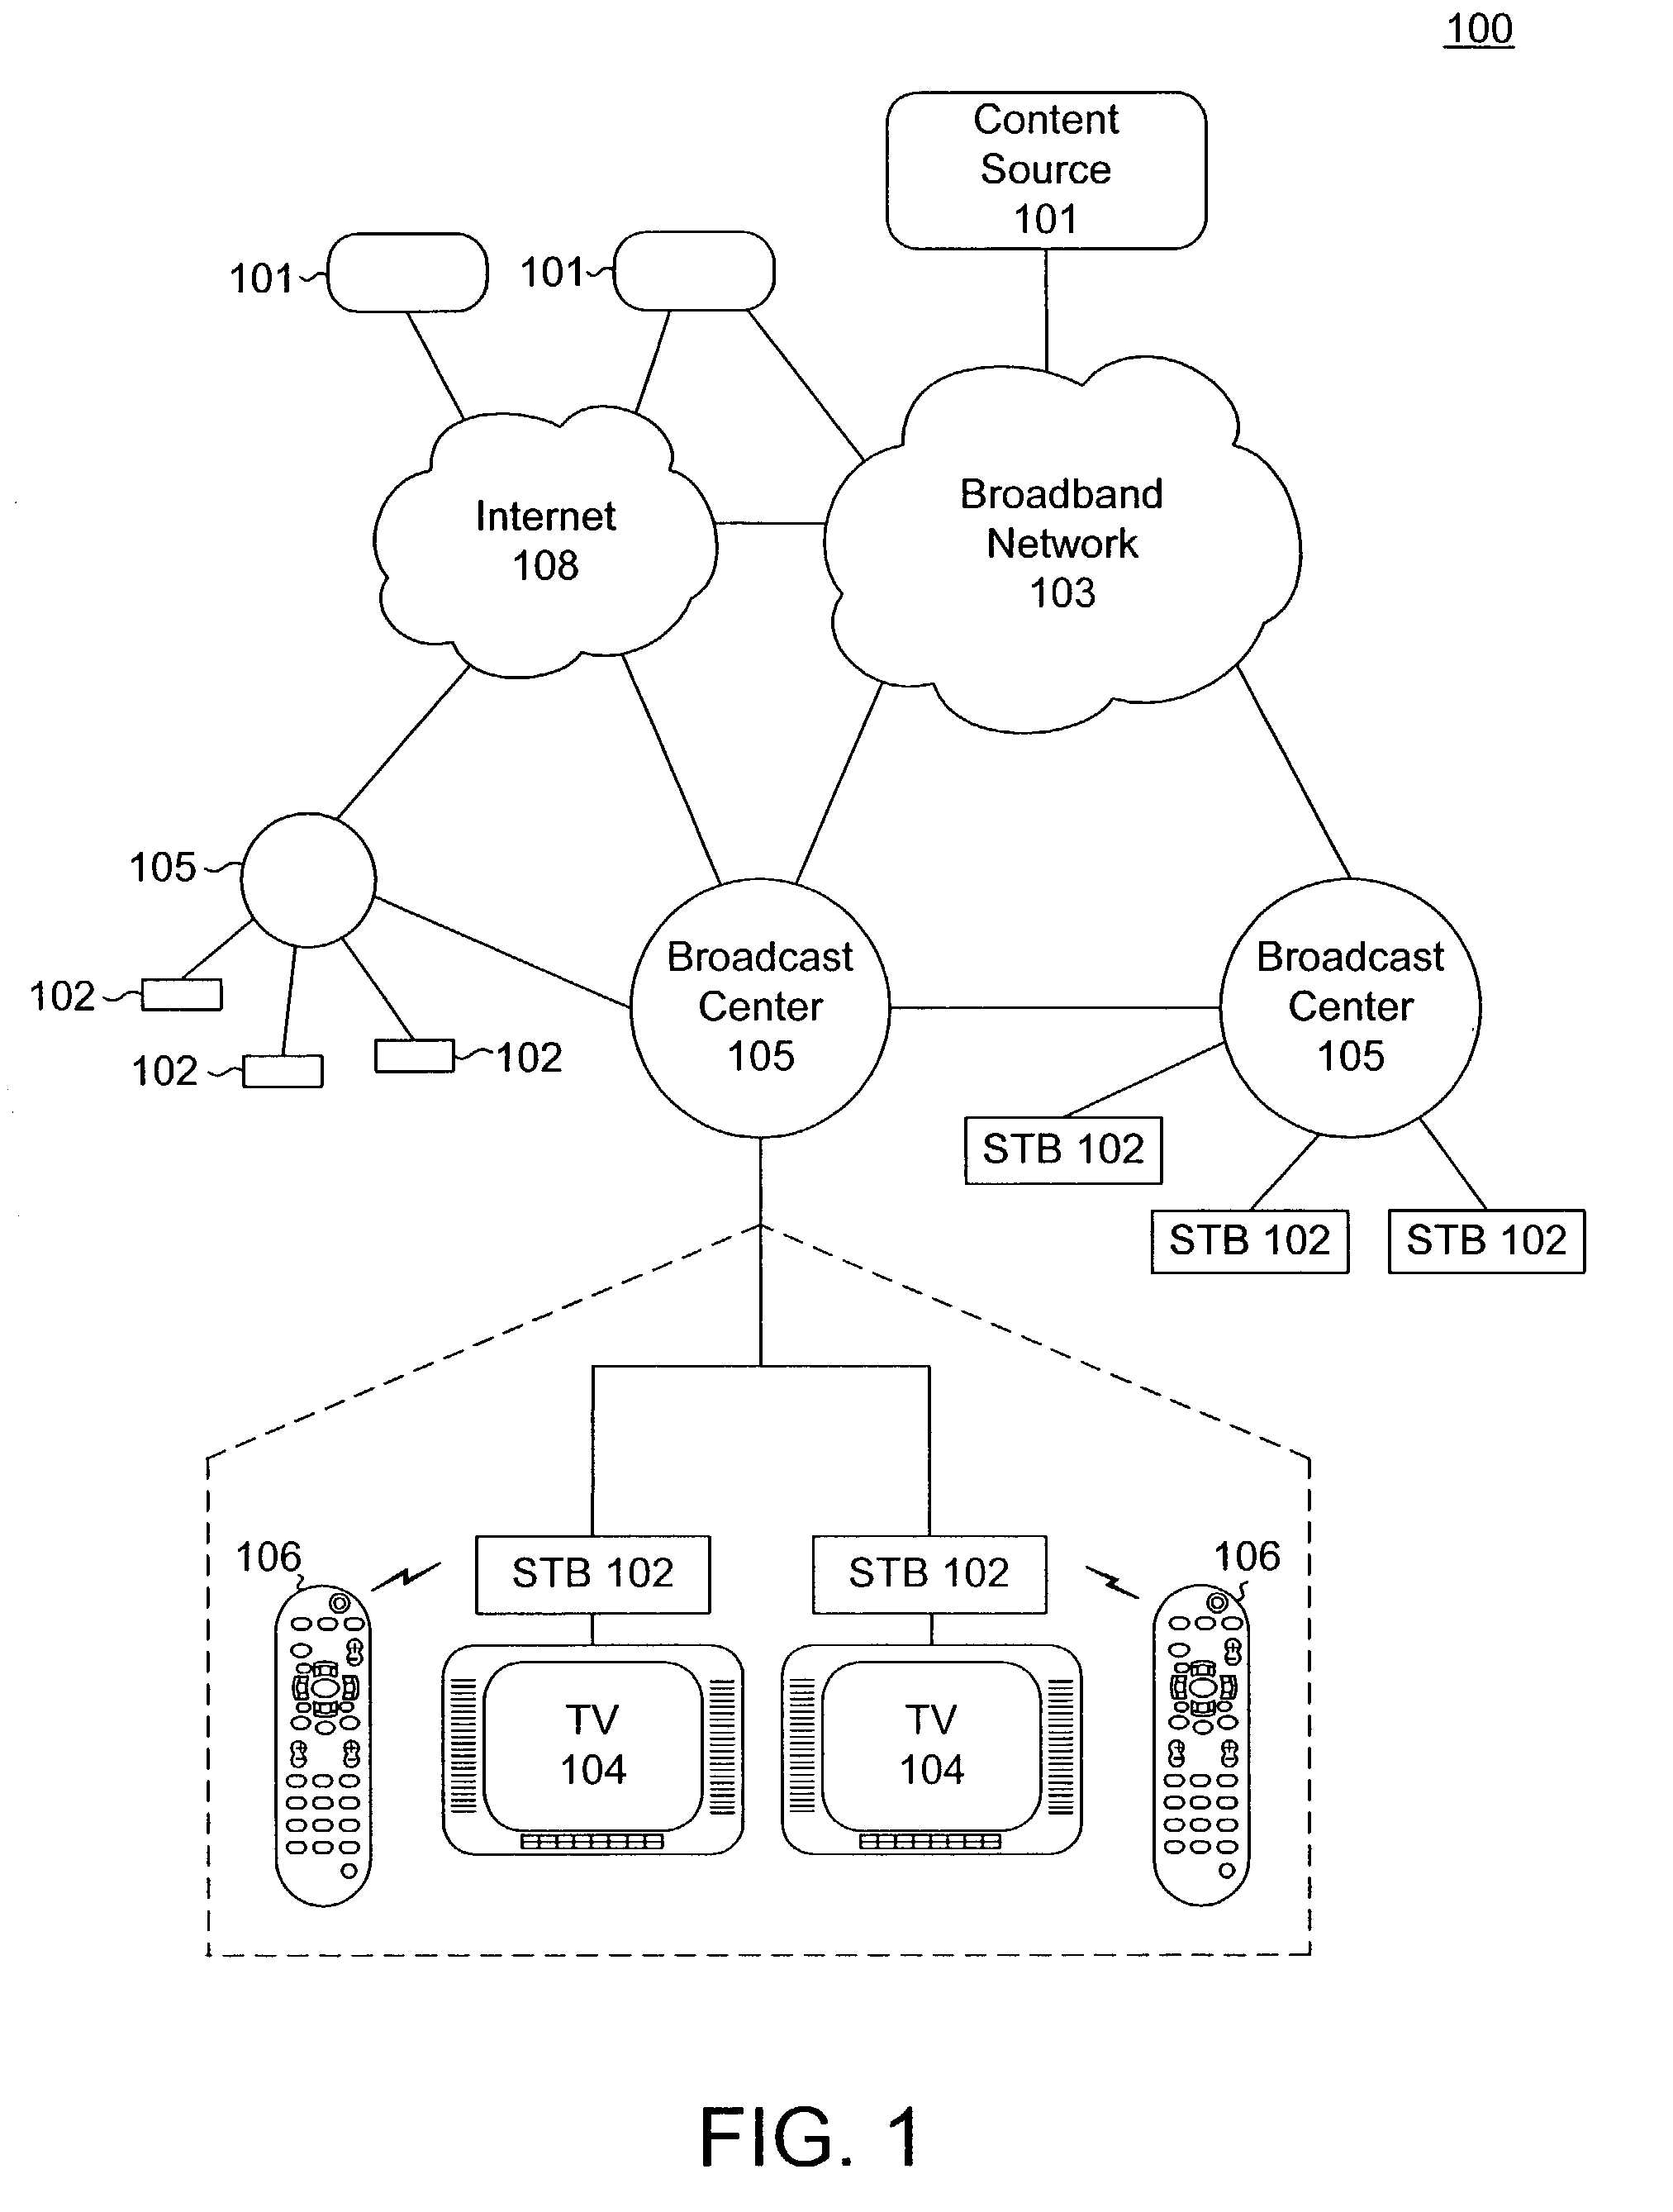 Focused navigation interface for a PC media center and extension device